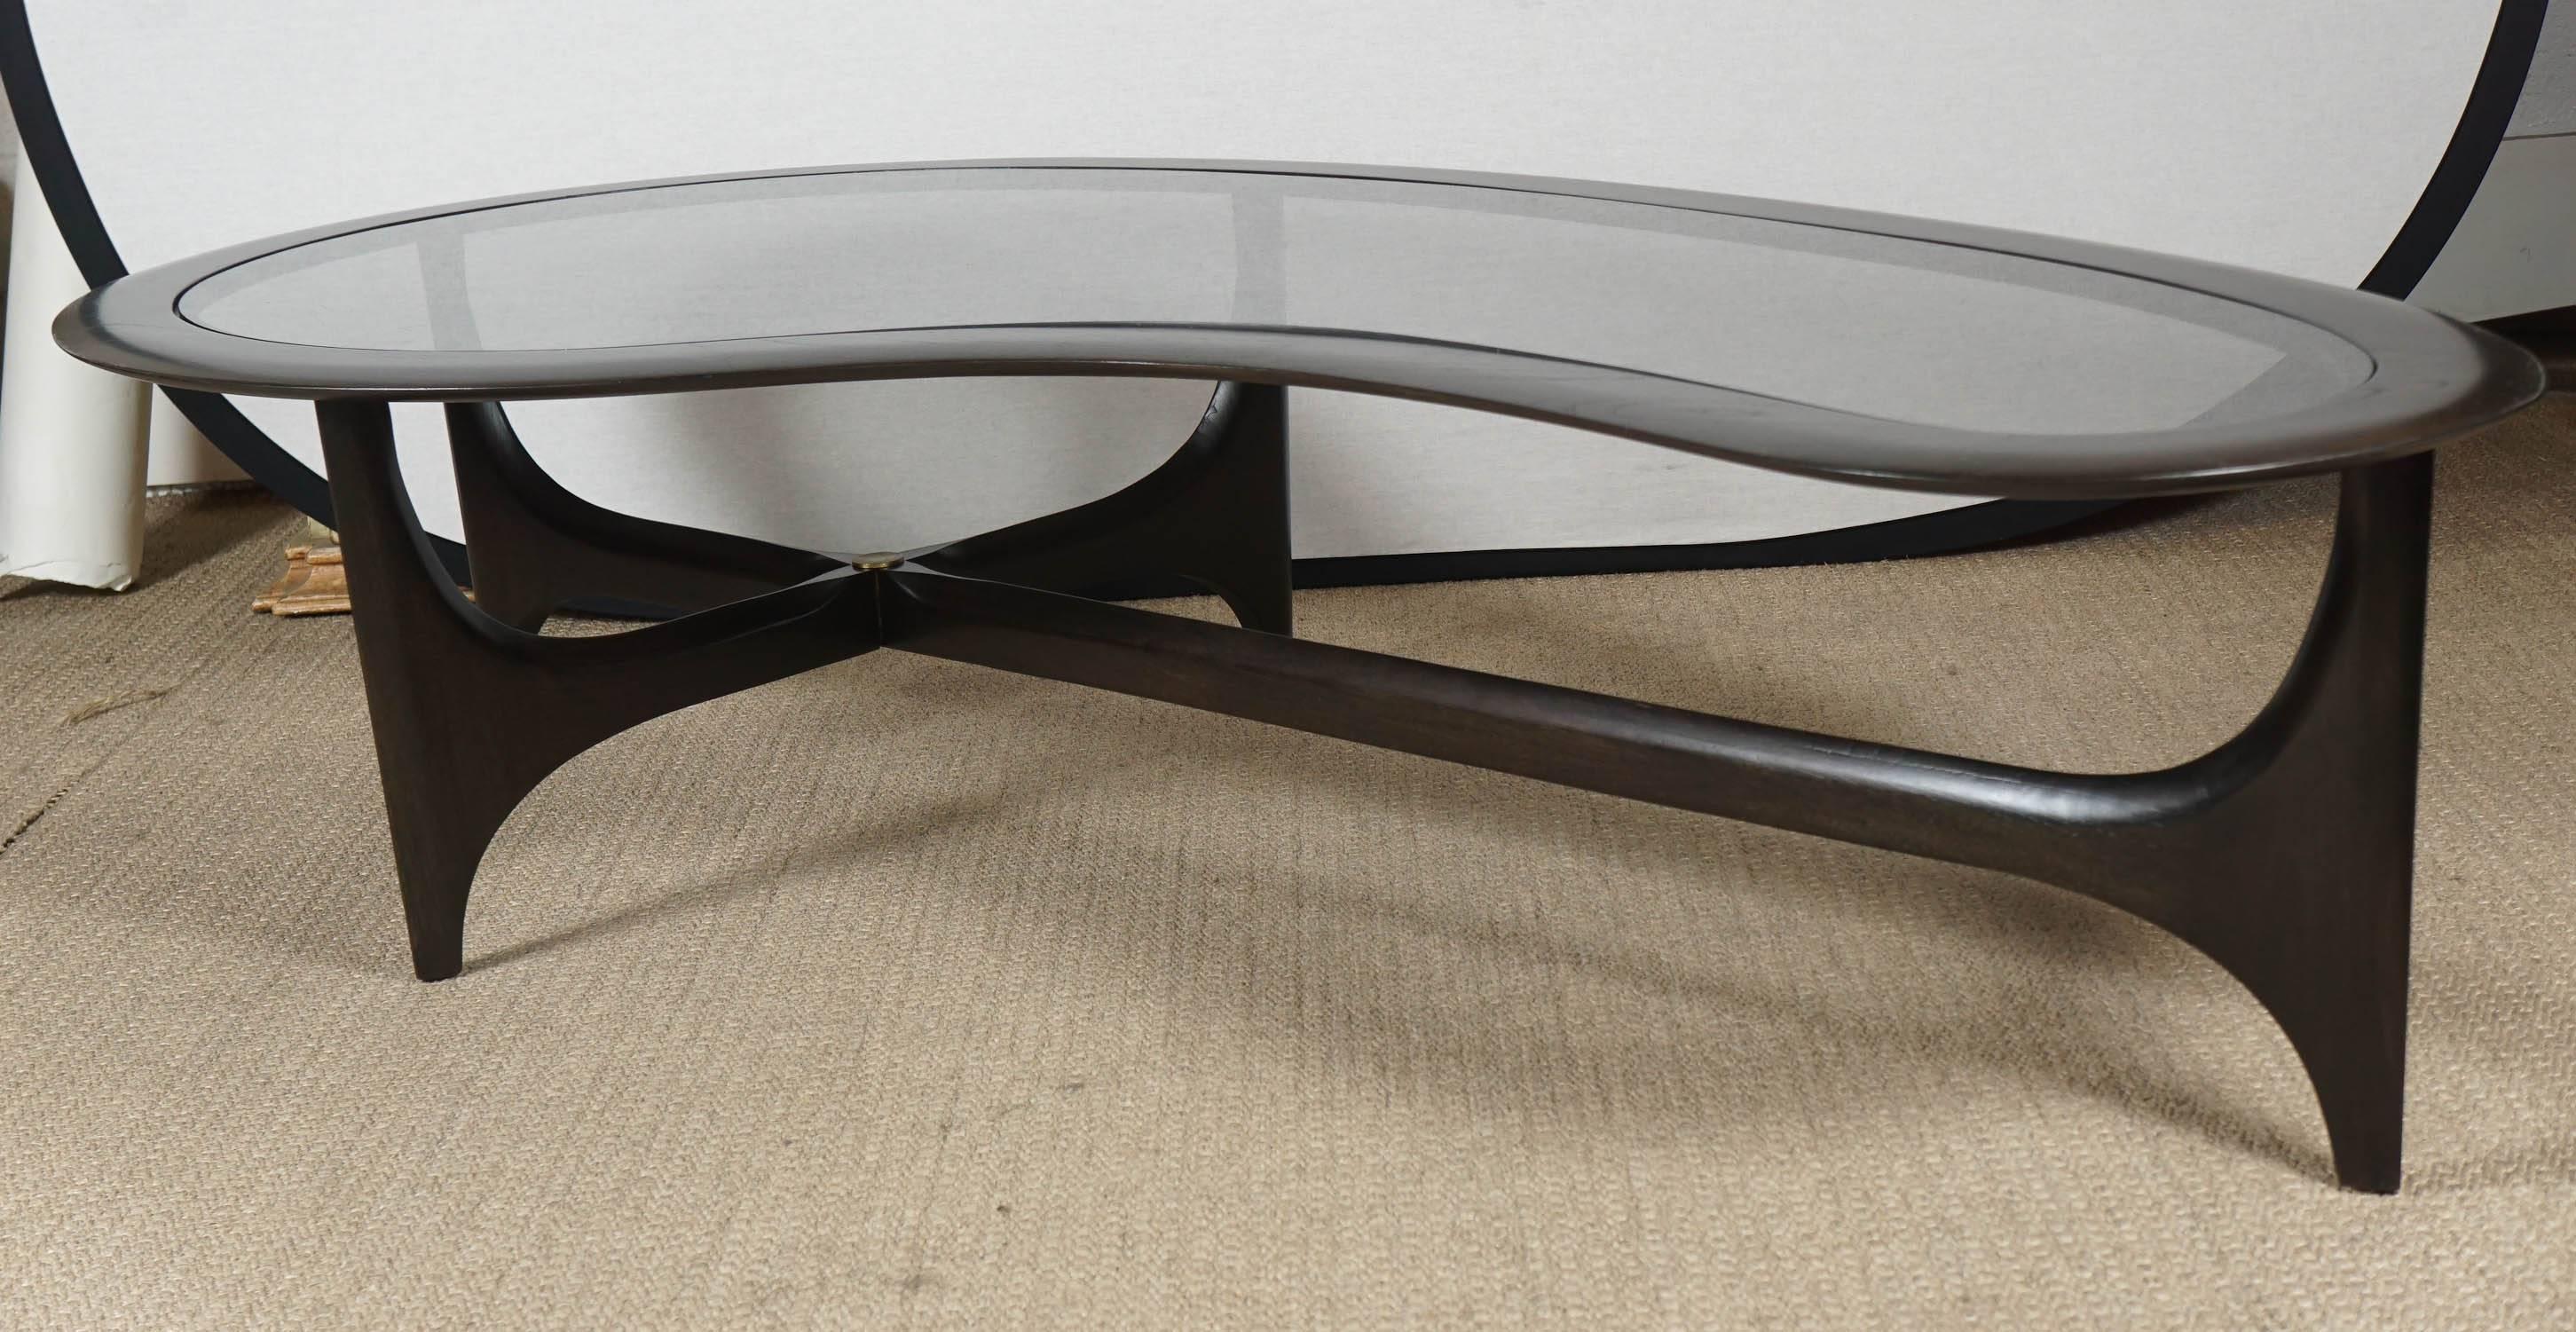 Here is a great boomerang coffee table in an ebonized black finish with a smoked glass top. The stretcher has a rosette medallion center.
The table is by Adrian Pearsall and has a new finish.